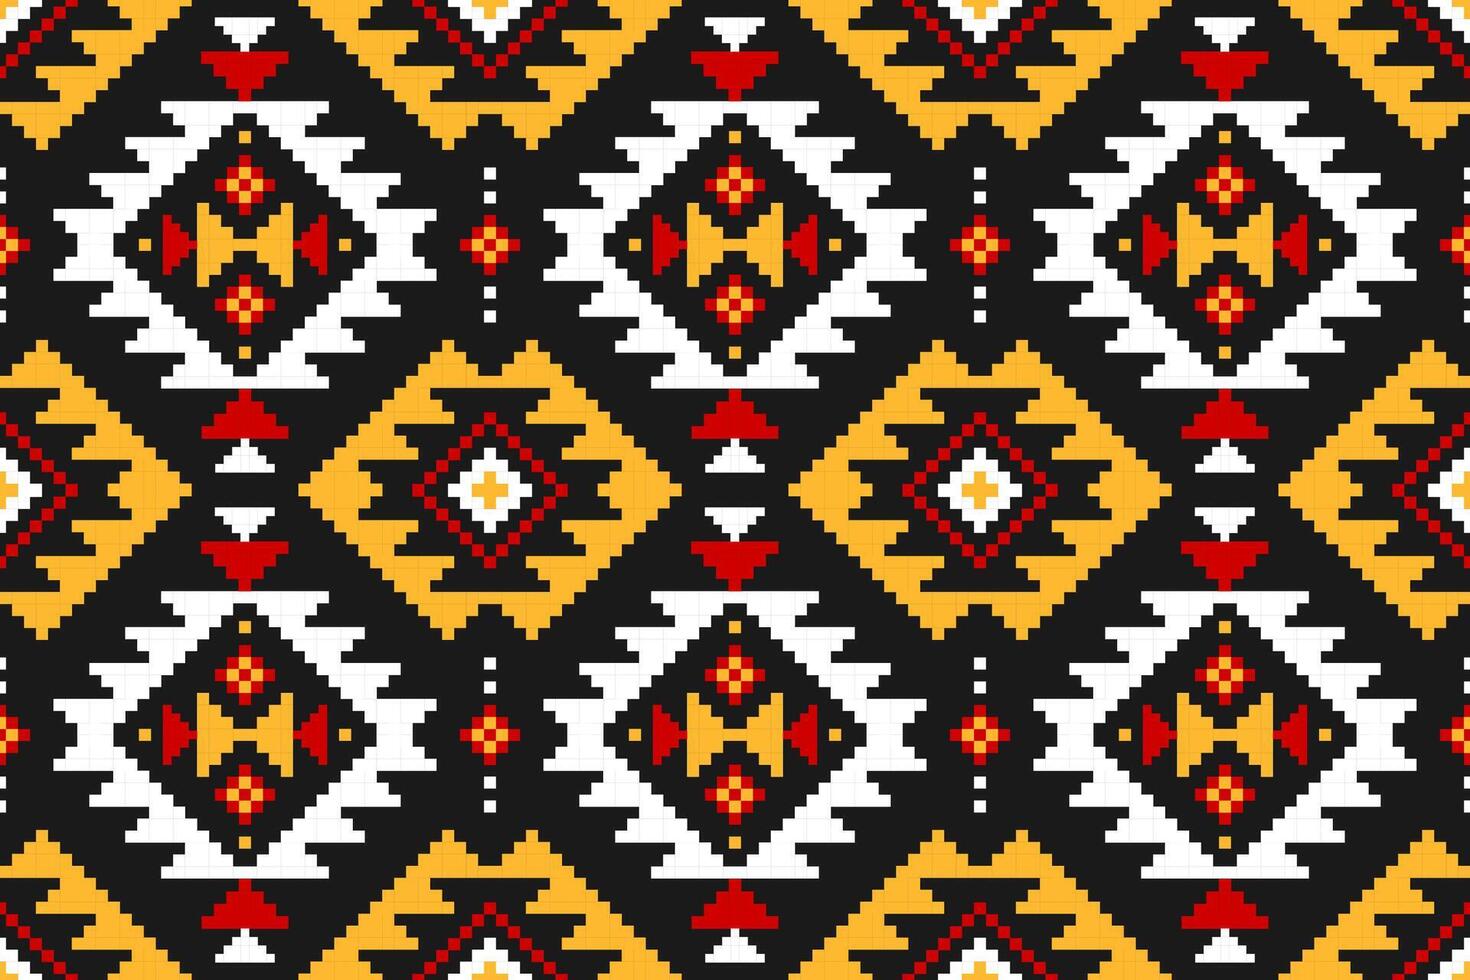 Fabric tribal pattern style. Geometric ethnic seamless pattern traditional. Aztec ethnic ornament print. Design for background, fabric, clothing, carpet, textile, batik, embroidery. vector